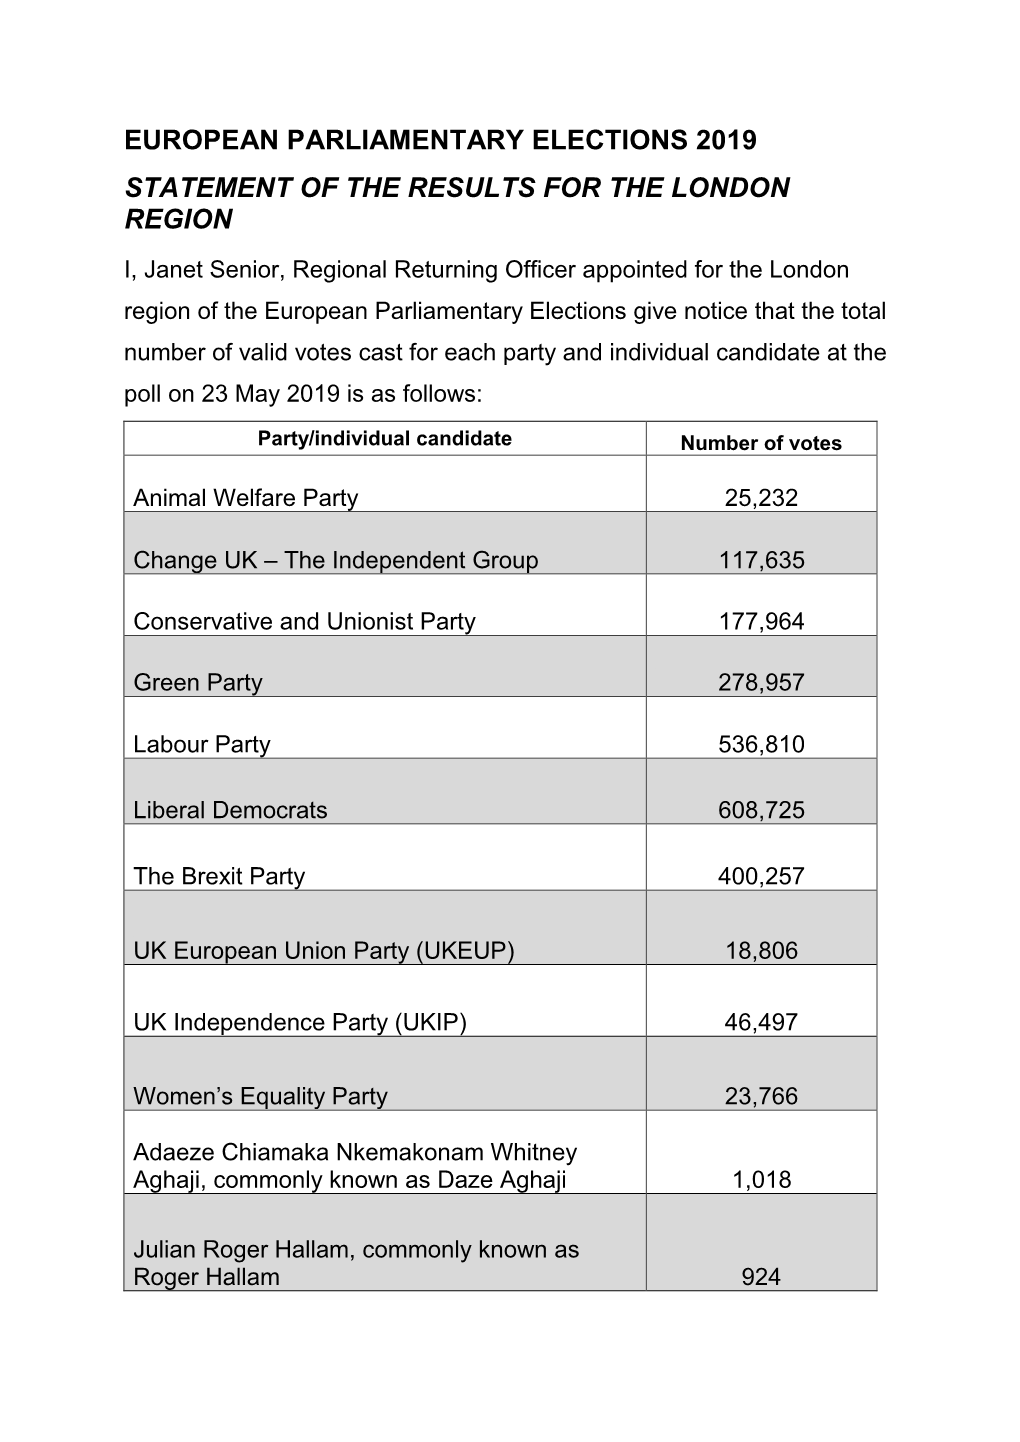 European Parliamentary Elections 2019 Statement of the Results for the London Region